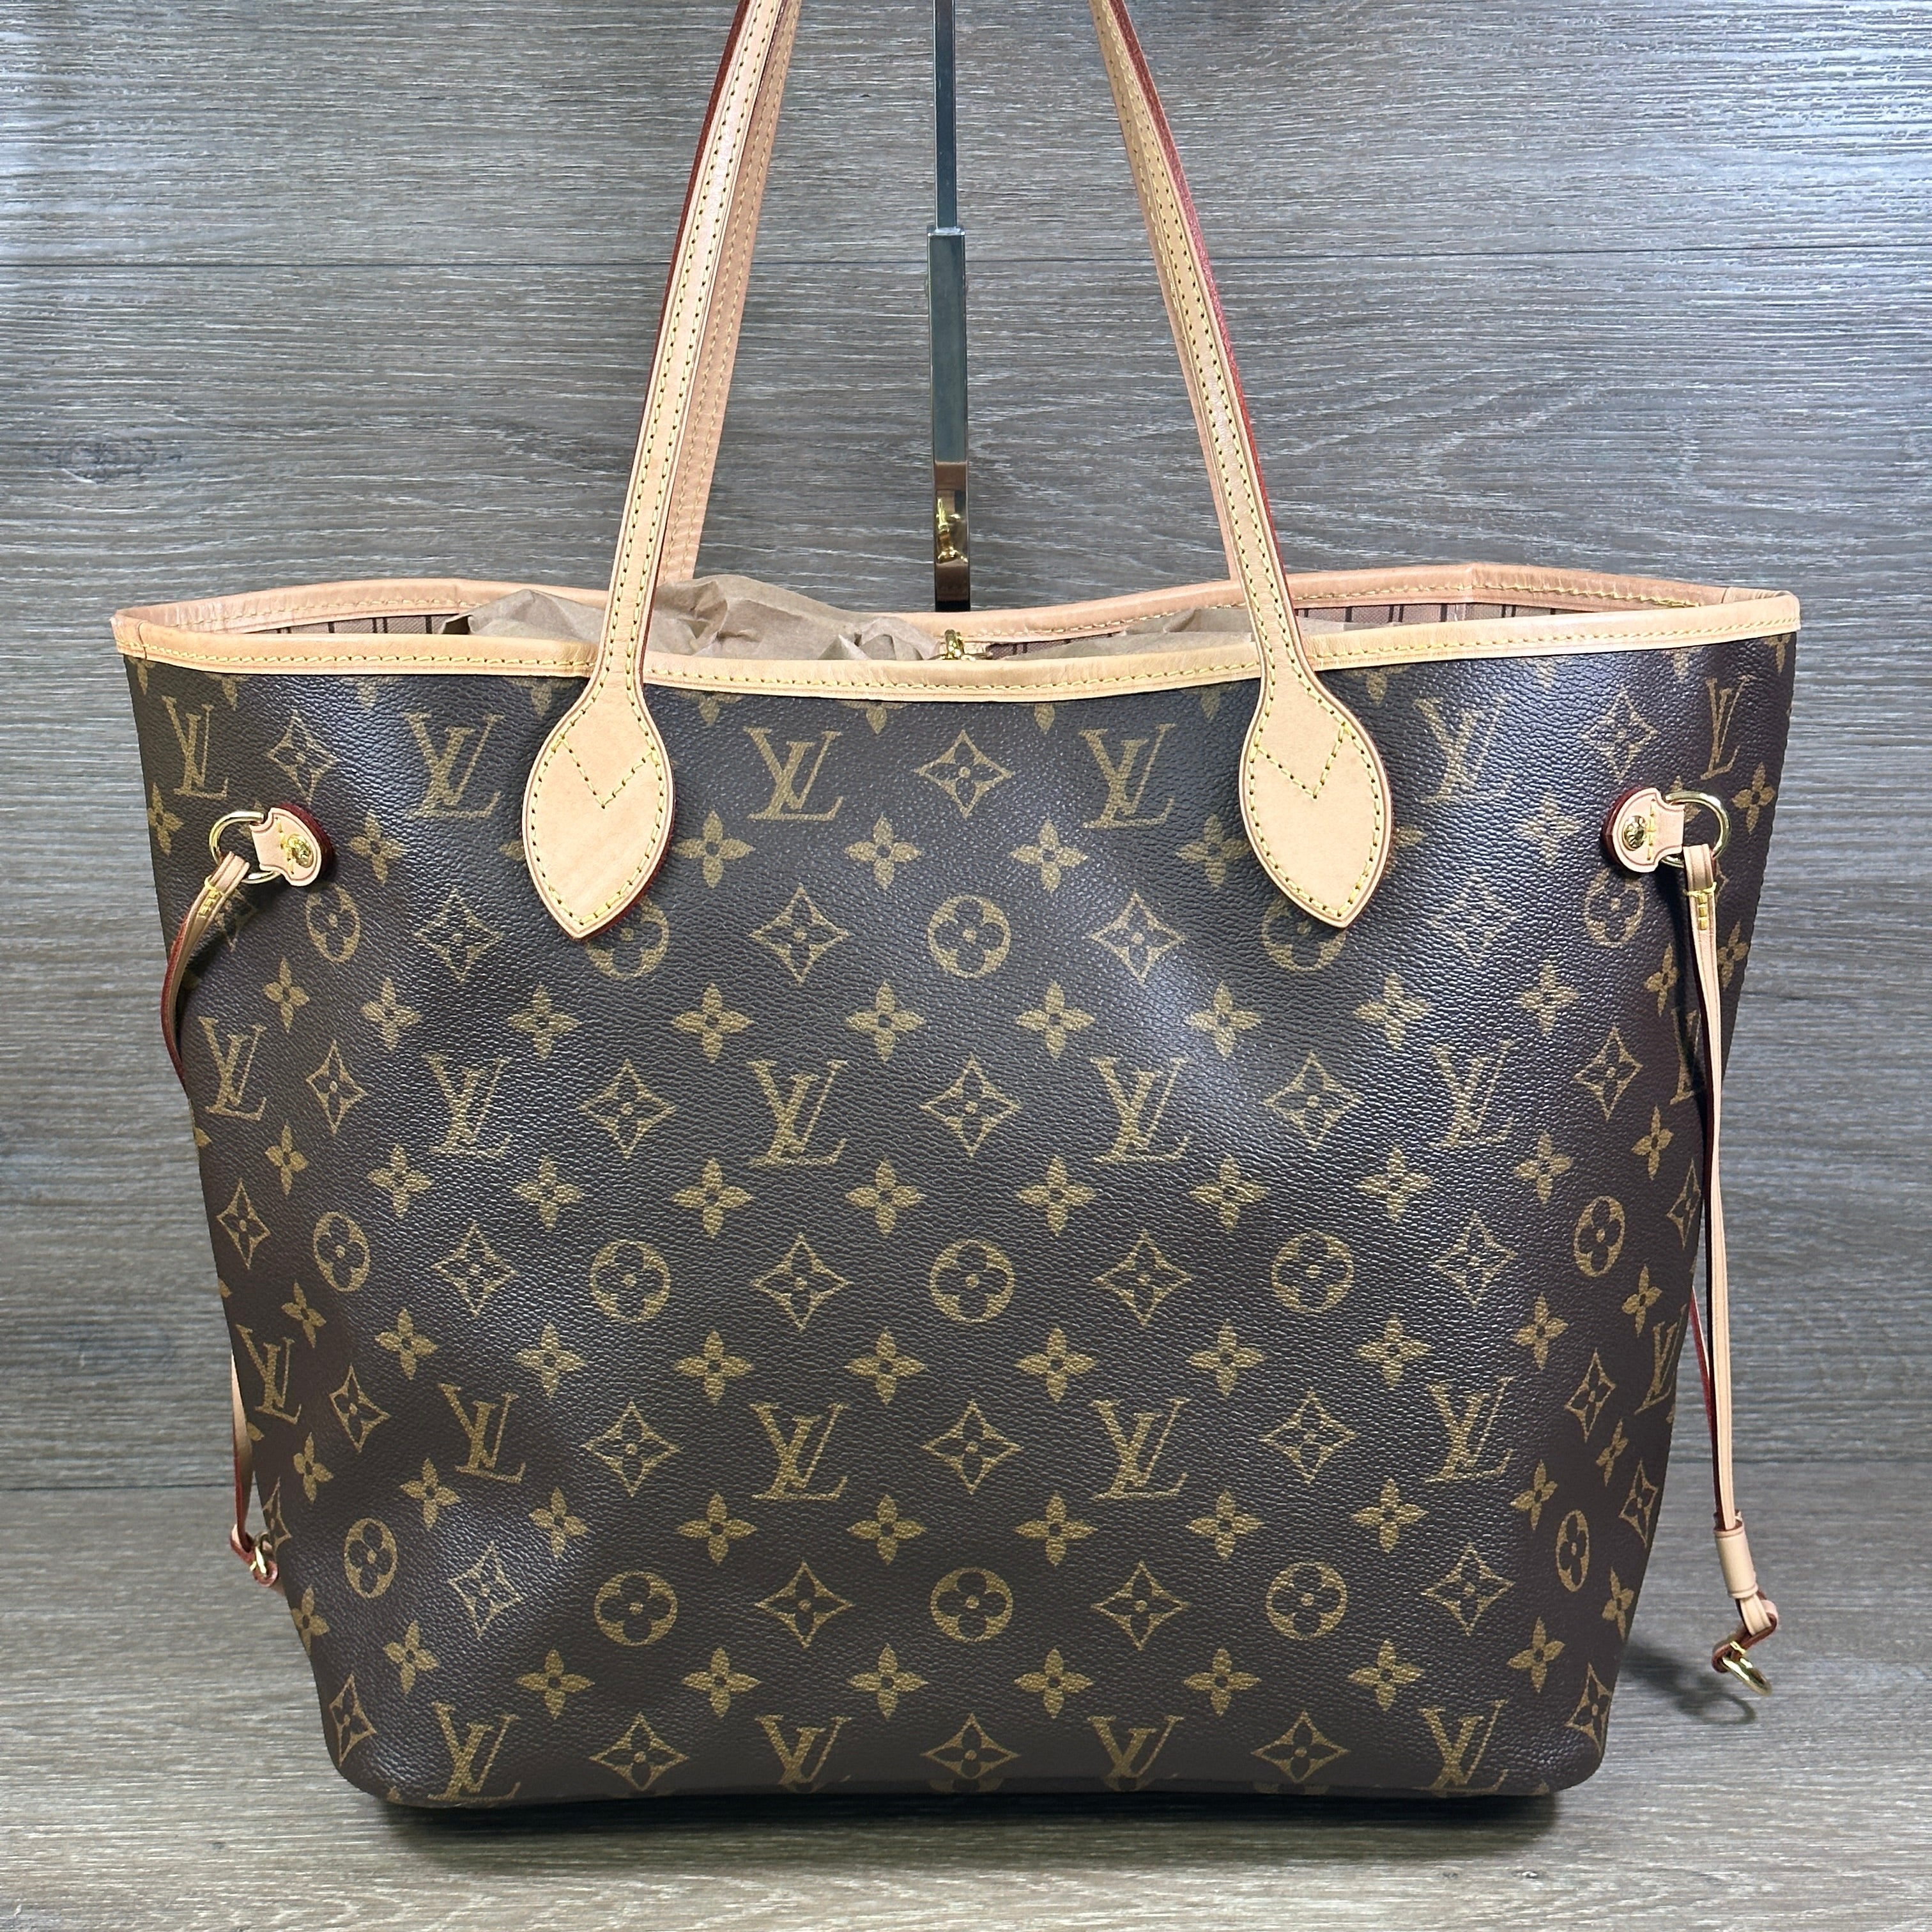 New and used Louis Vuitton Neverfull Bags for sale, Facebook Marketplace